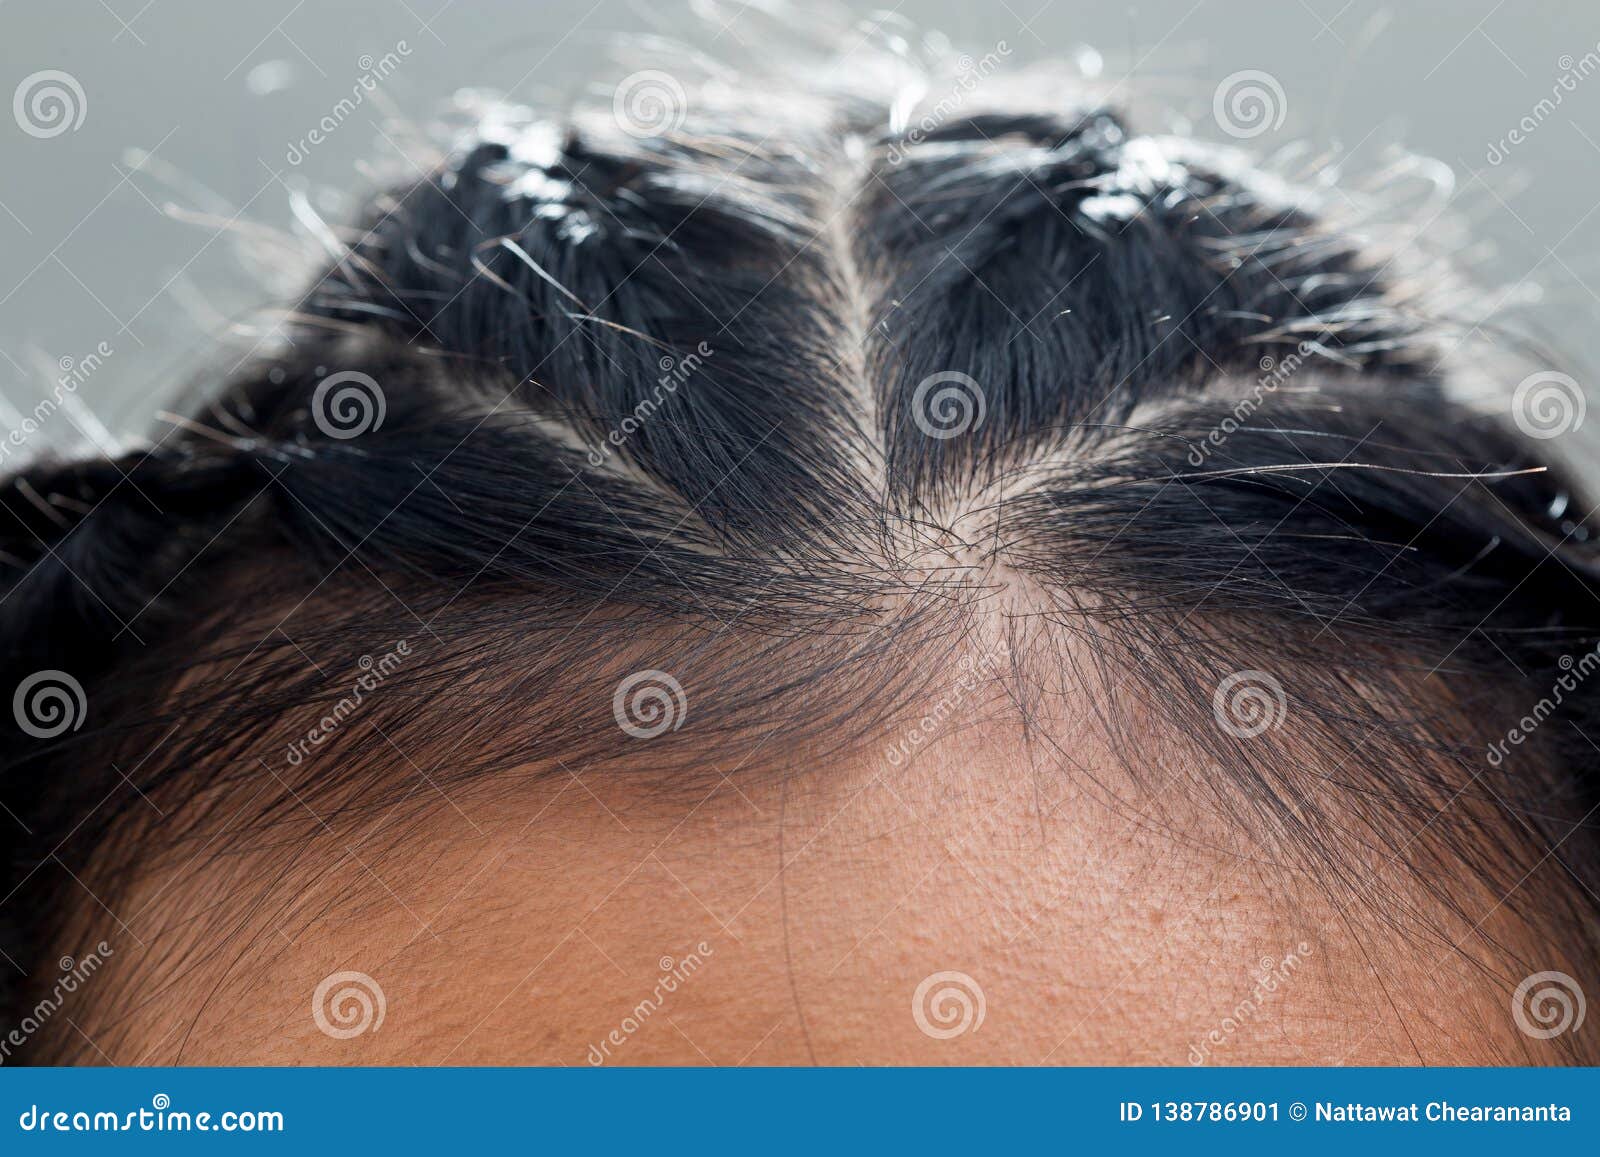 Body Part Hair Root Head Skin Close Up Woman Stock Image - Image of clean,  close: 138786901